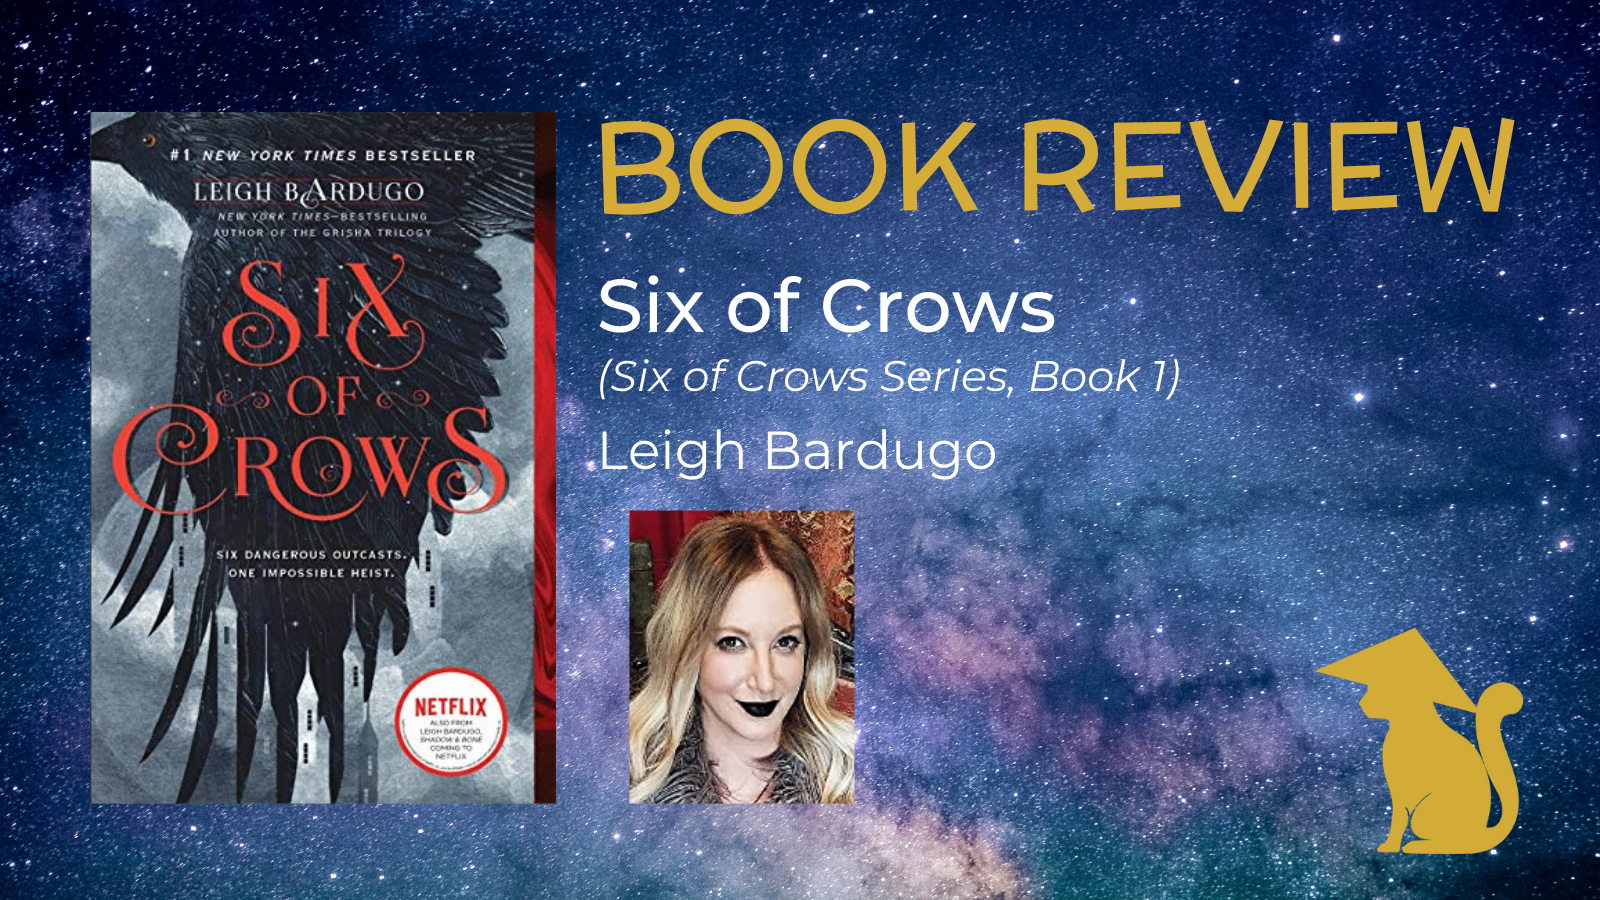 You are currently viewing Six of Crows by Leigh Bardugo